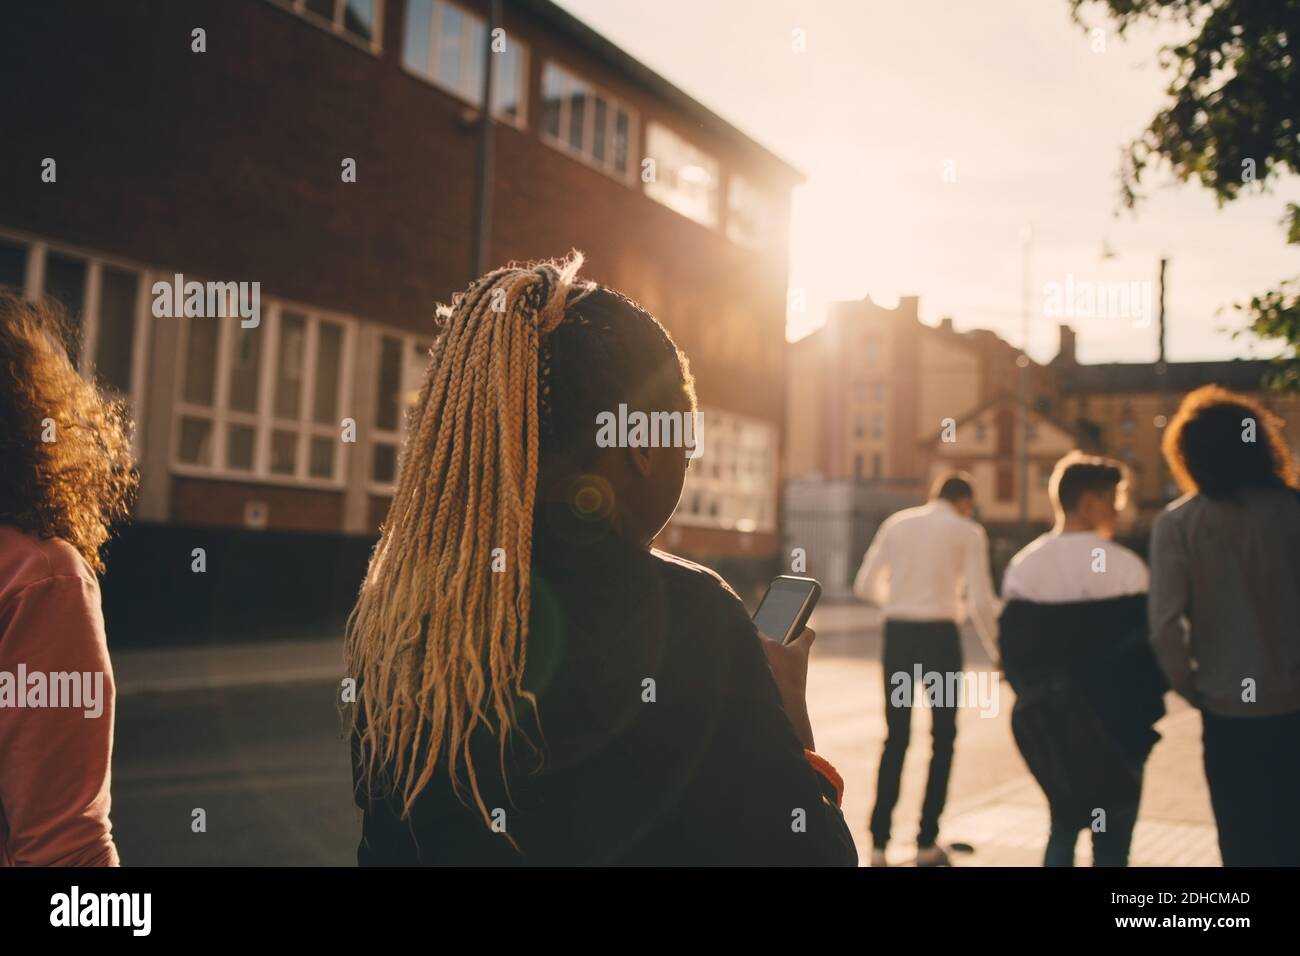 Rear view of teenage girl text messaging on smart phone while walking with friends in city Stock Photo